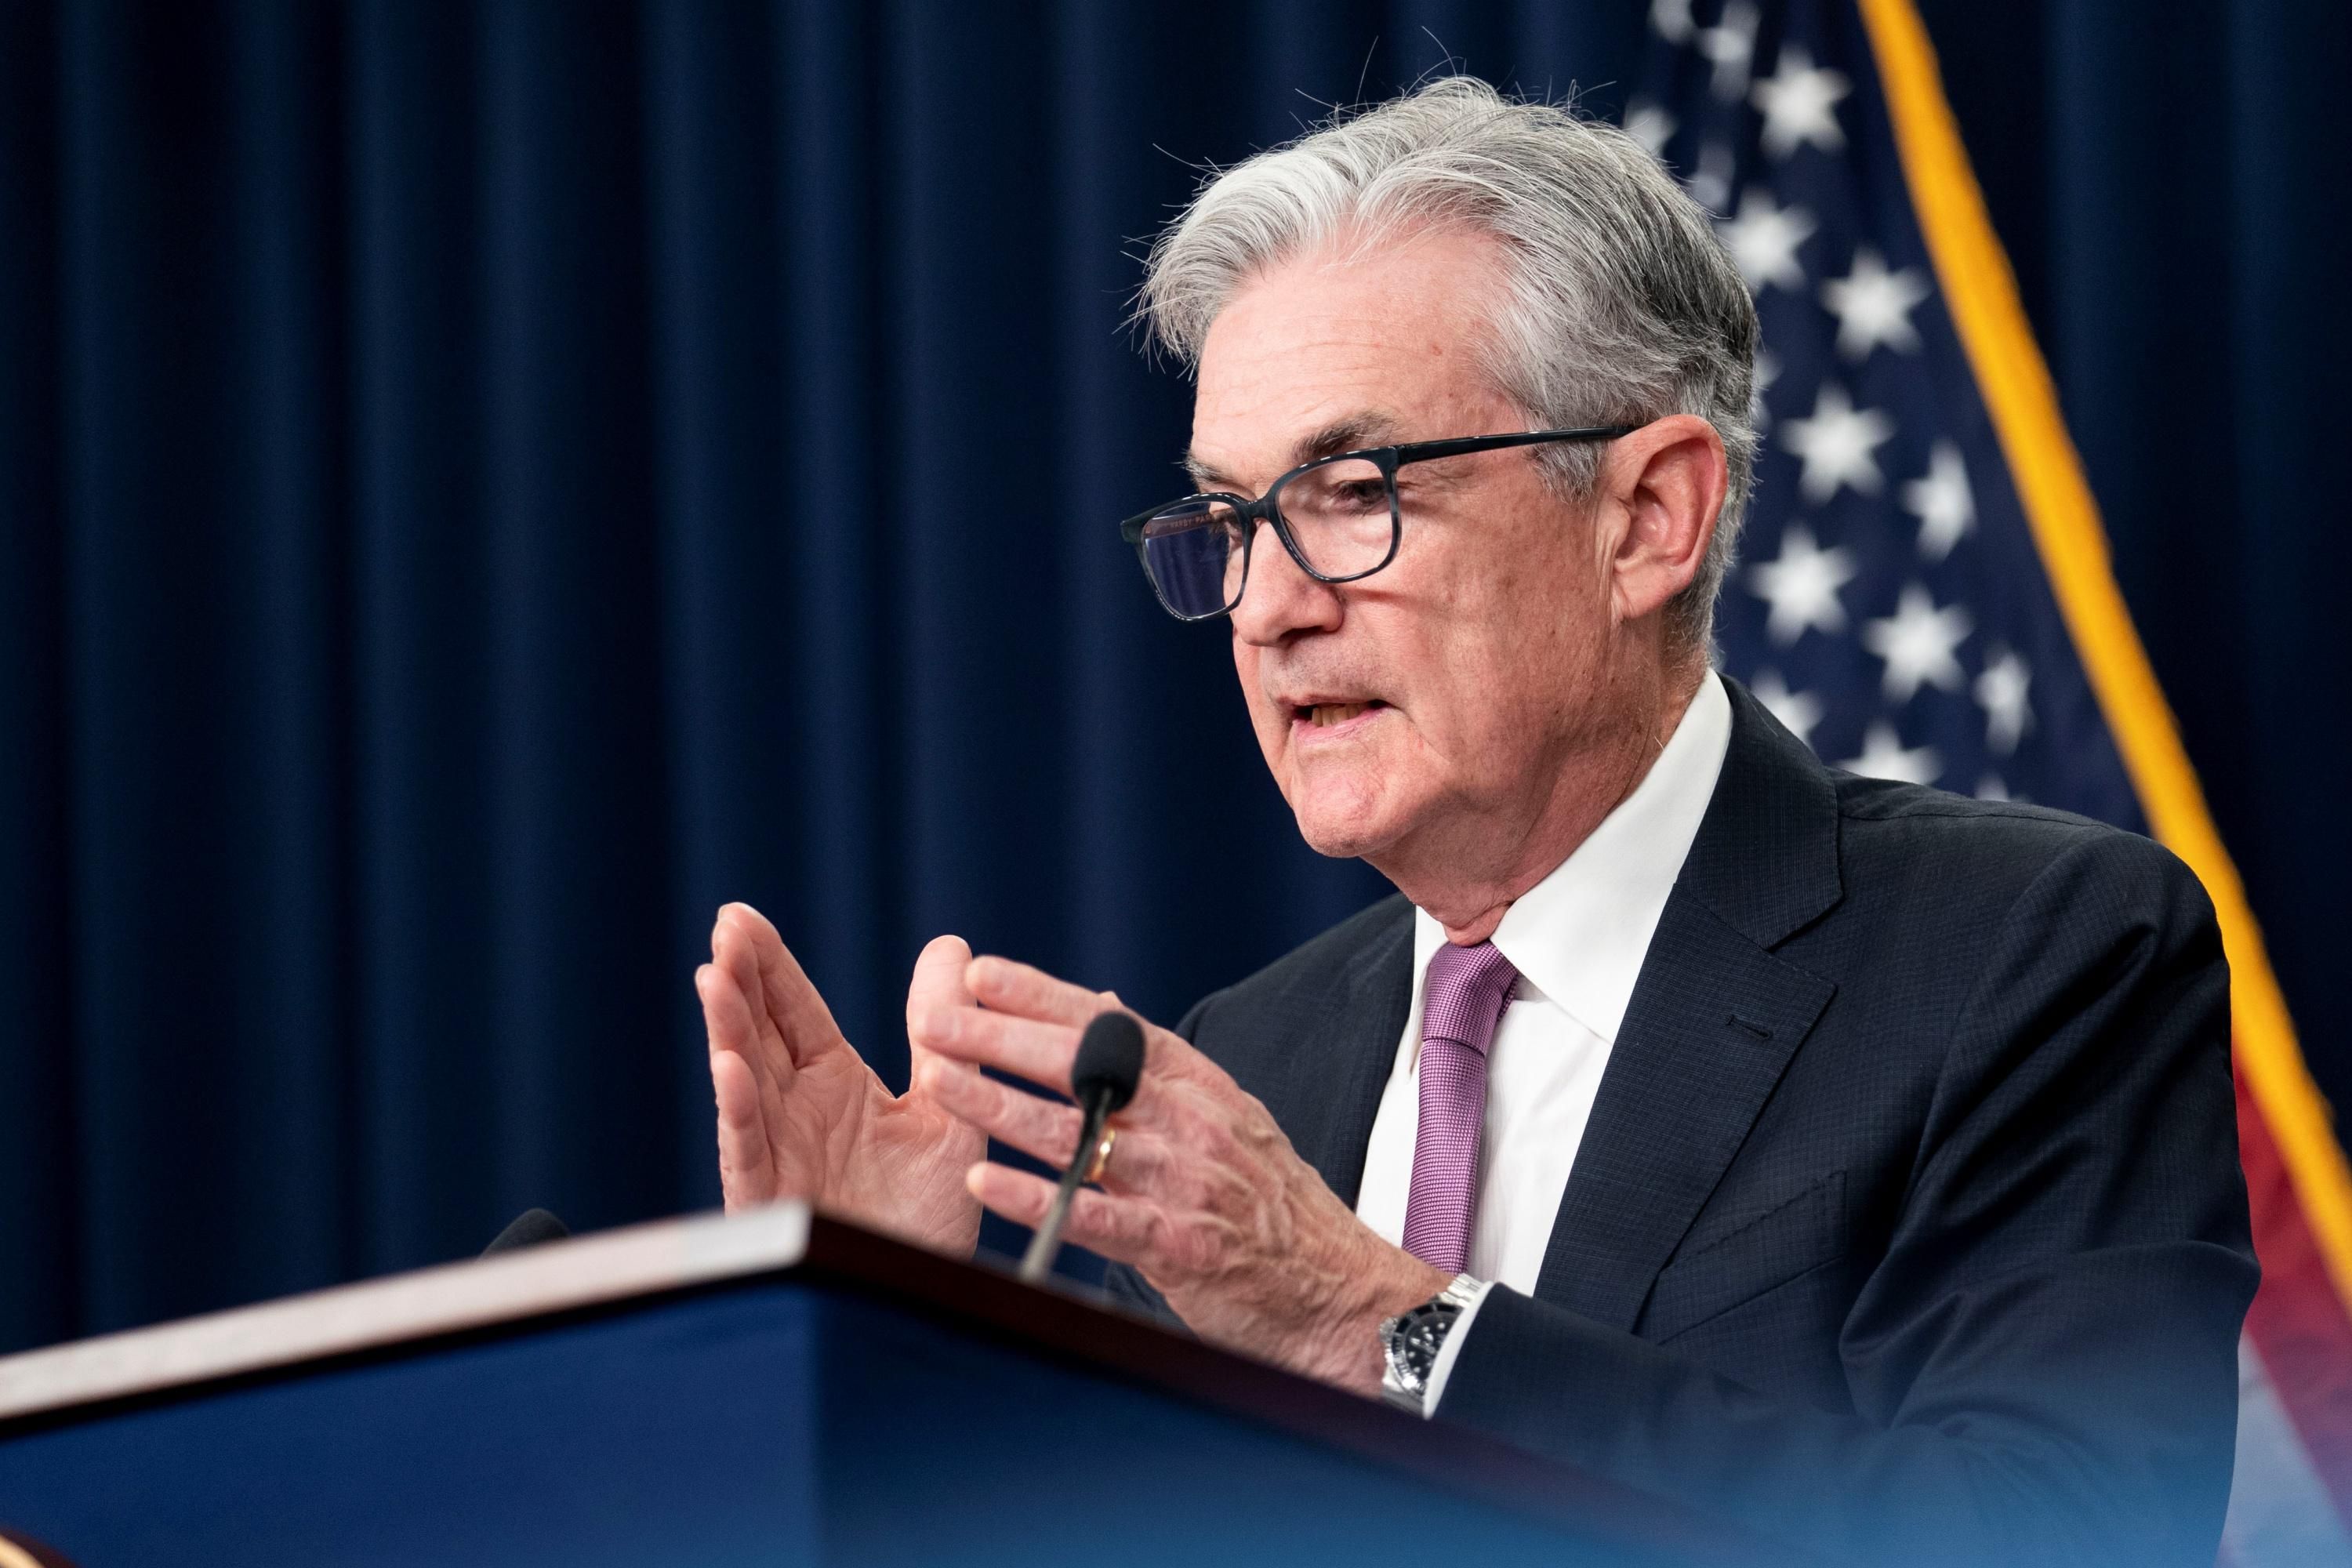 Fed Chair Jerome Powell speaks at a press conference